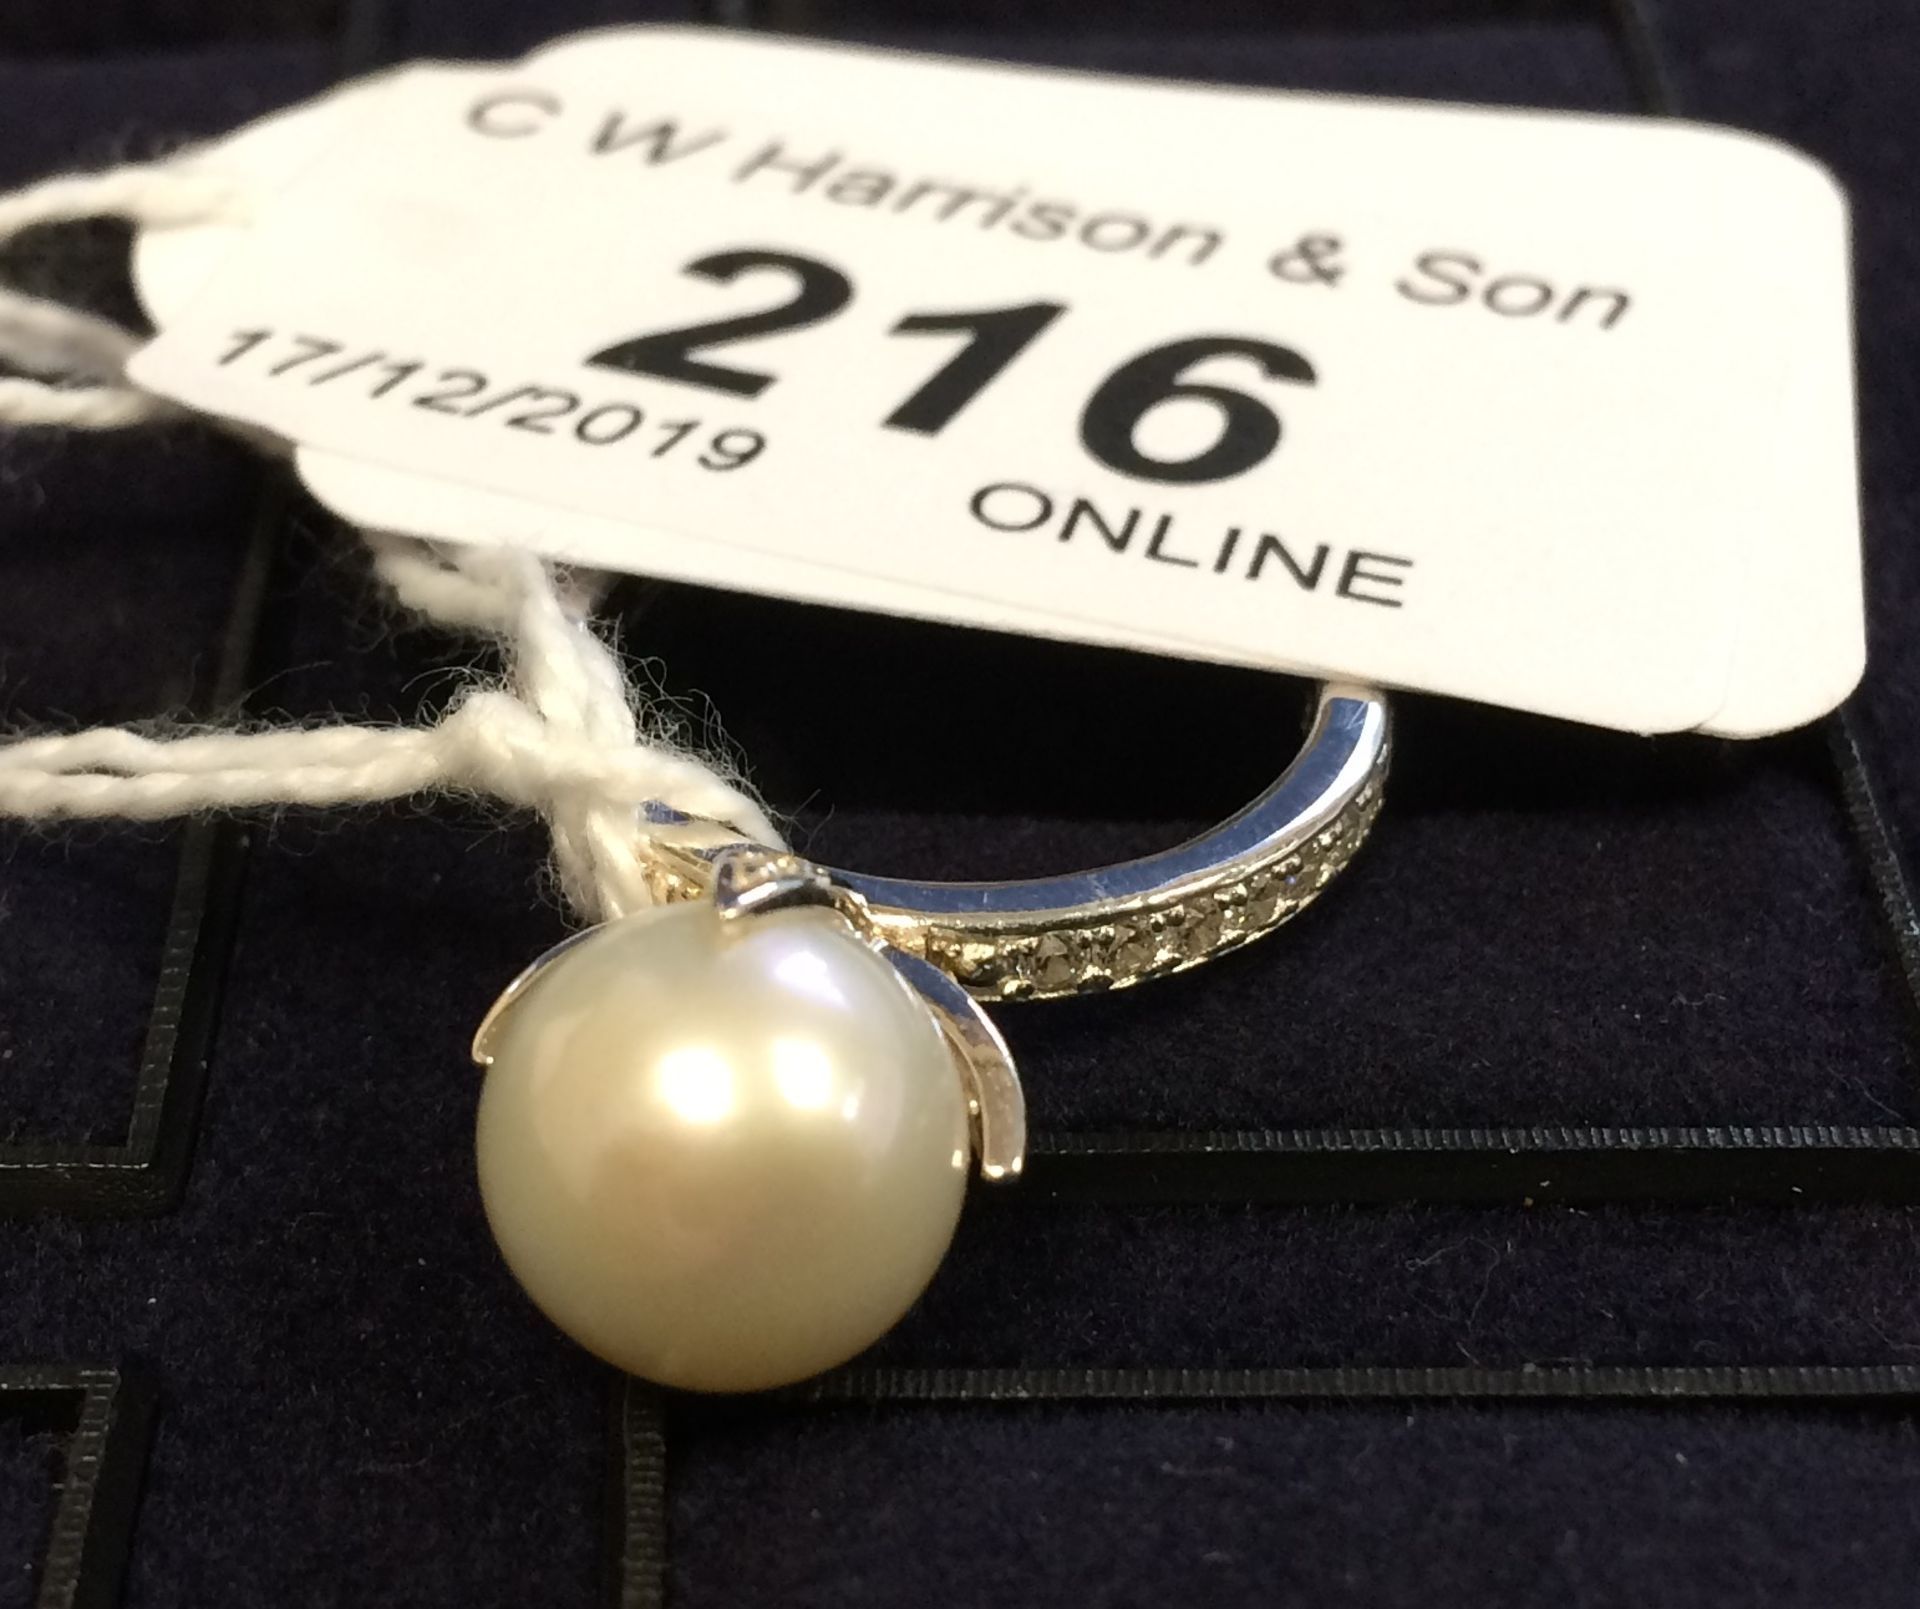 Thomas Sabo 925 sterling silver ring J RRP £98 (please note this lot is subject to VAT)